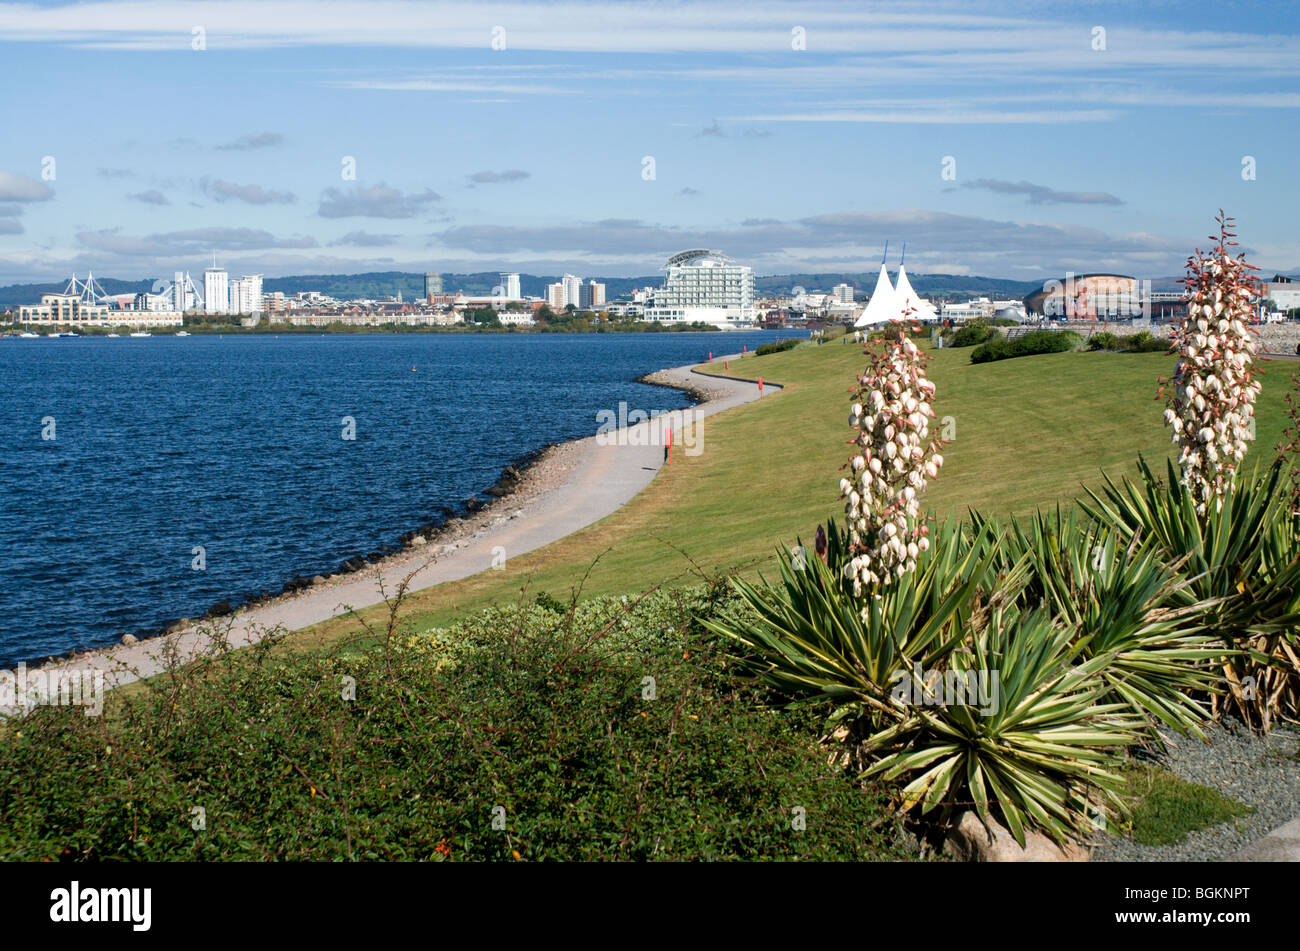 Cardiff Bay from the Barrage, Cardiff, South Wales, UK. Stock Photo